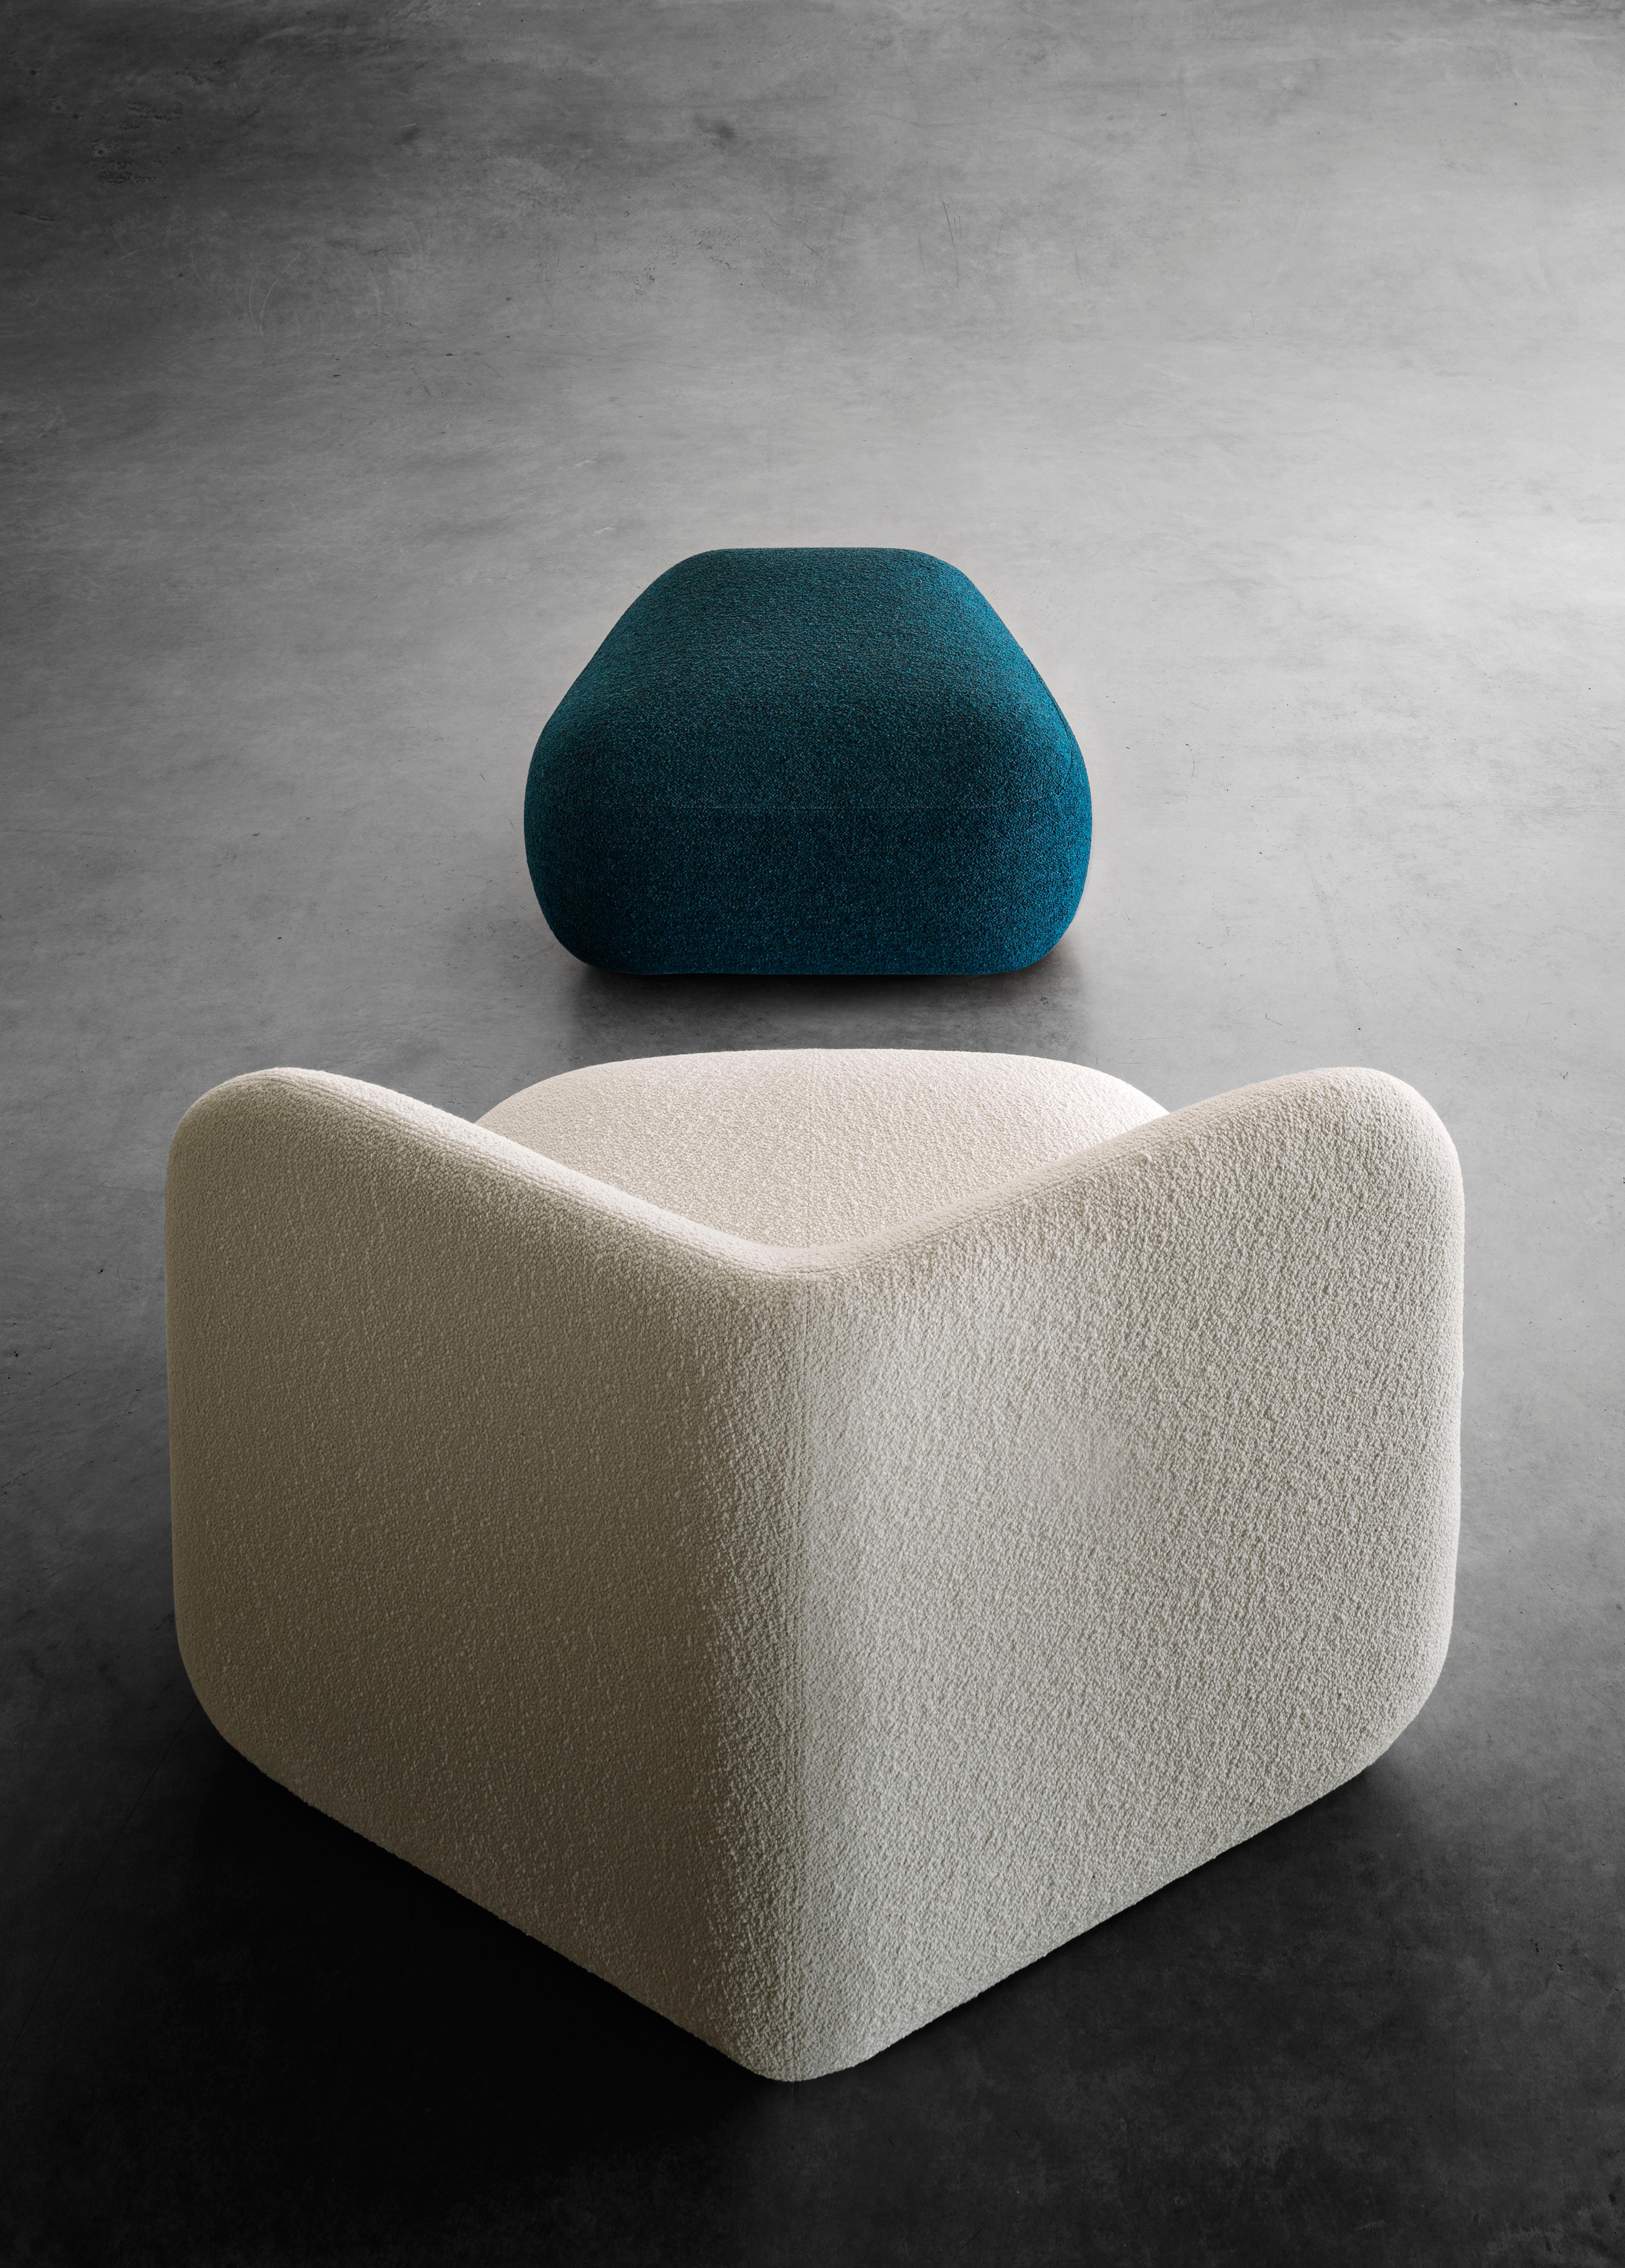 Botera was born to be comfortable, everywhere. To better exploit the volumes of the armchair in all situations, we have made it an entire family of modular upholstered items, amplifying the seating possibilities. To relax, doze off, raise your legs,